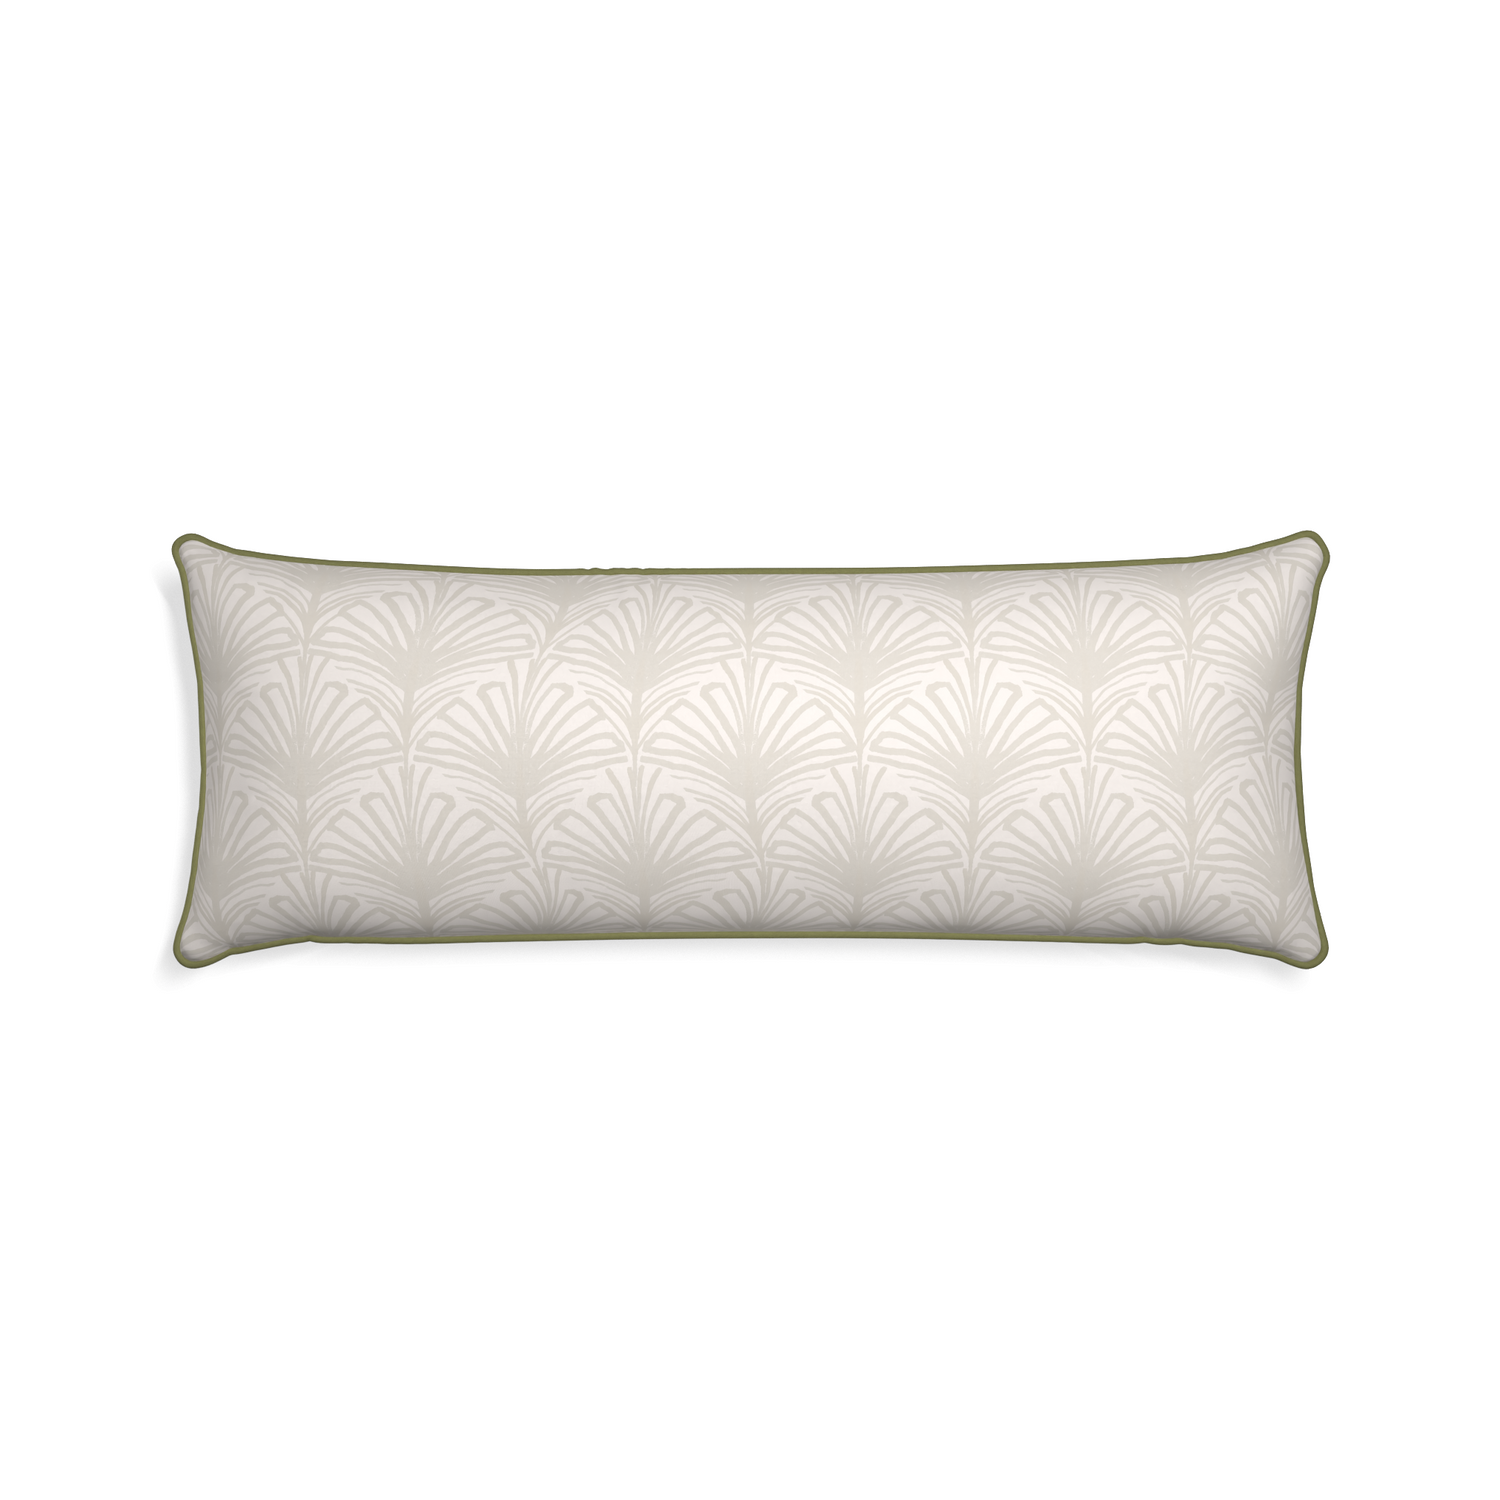 Xl-lumbar suzy sand custom pillow with moss piping on white background